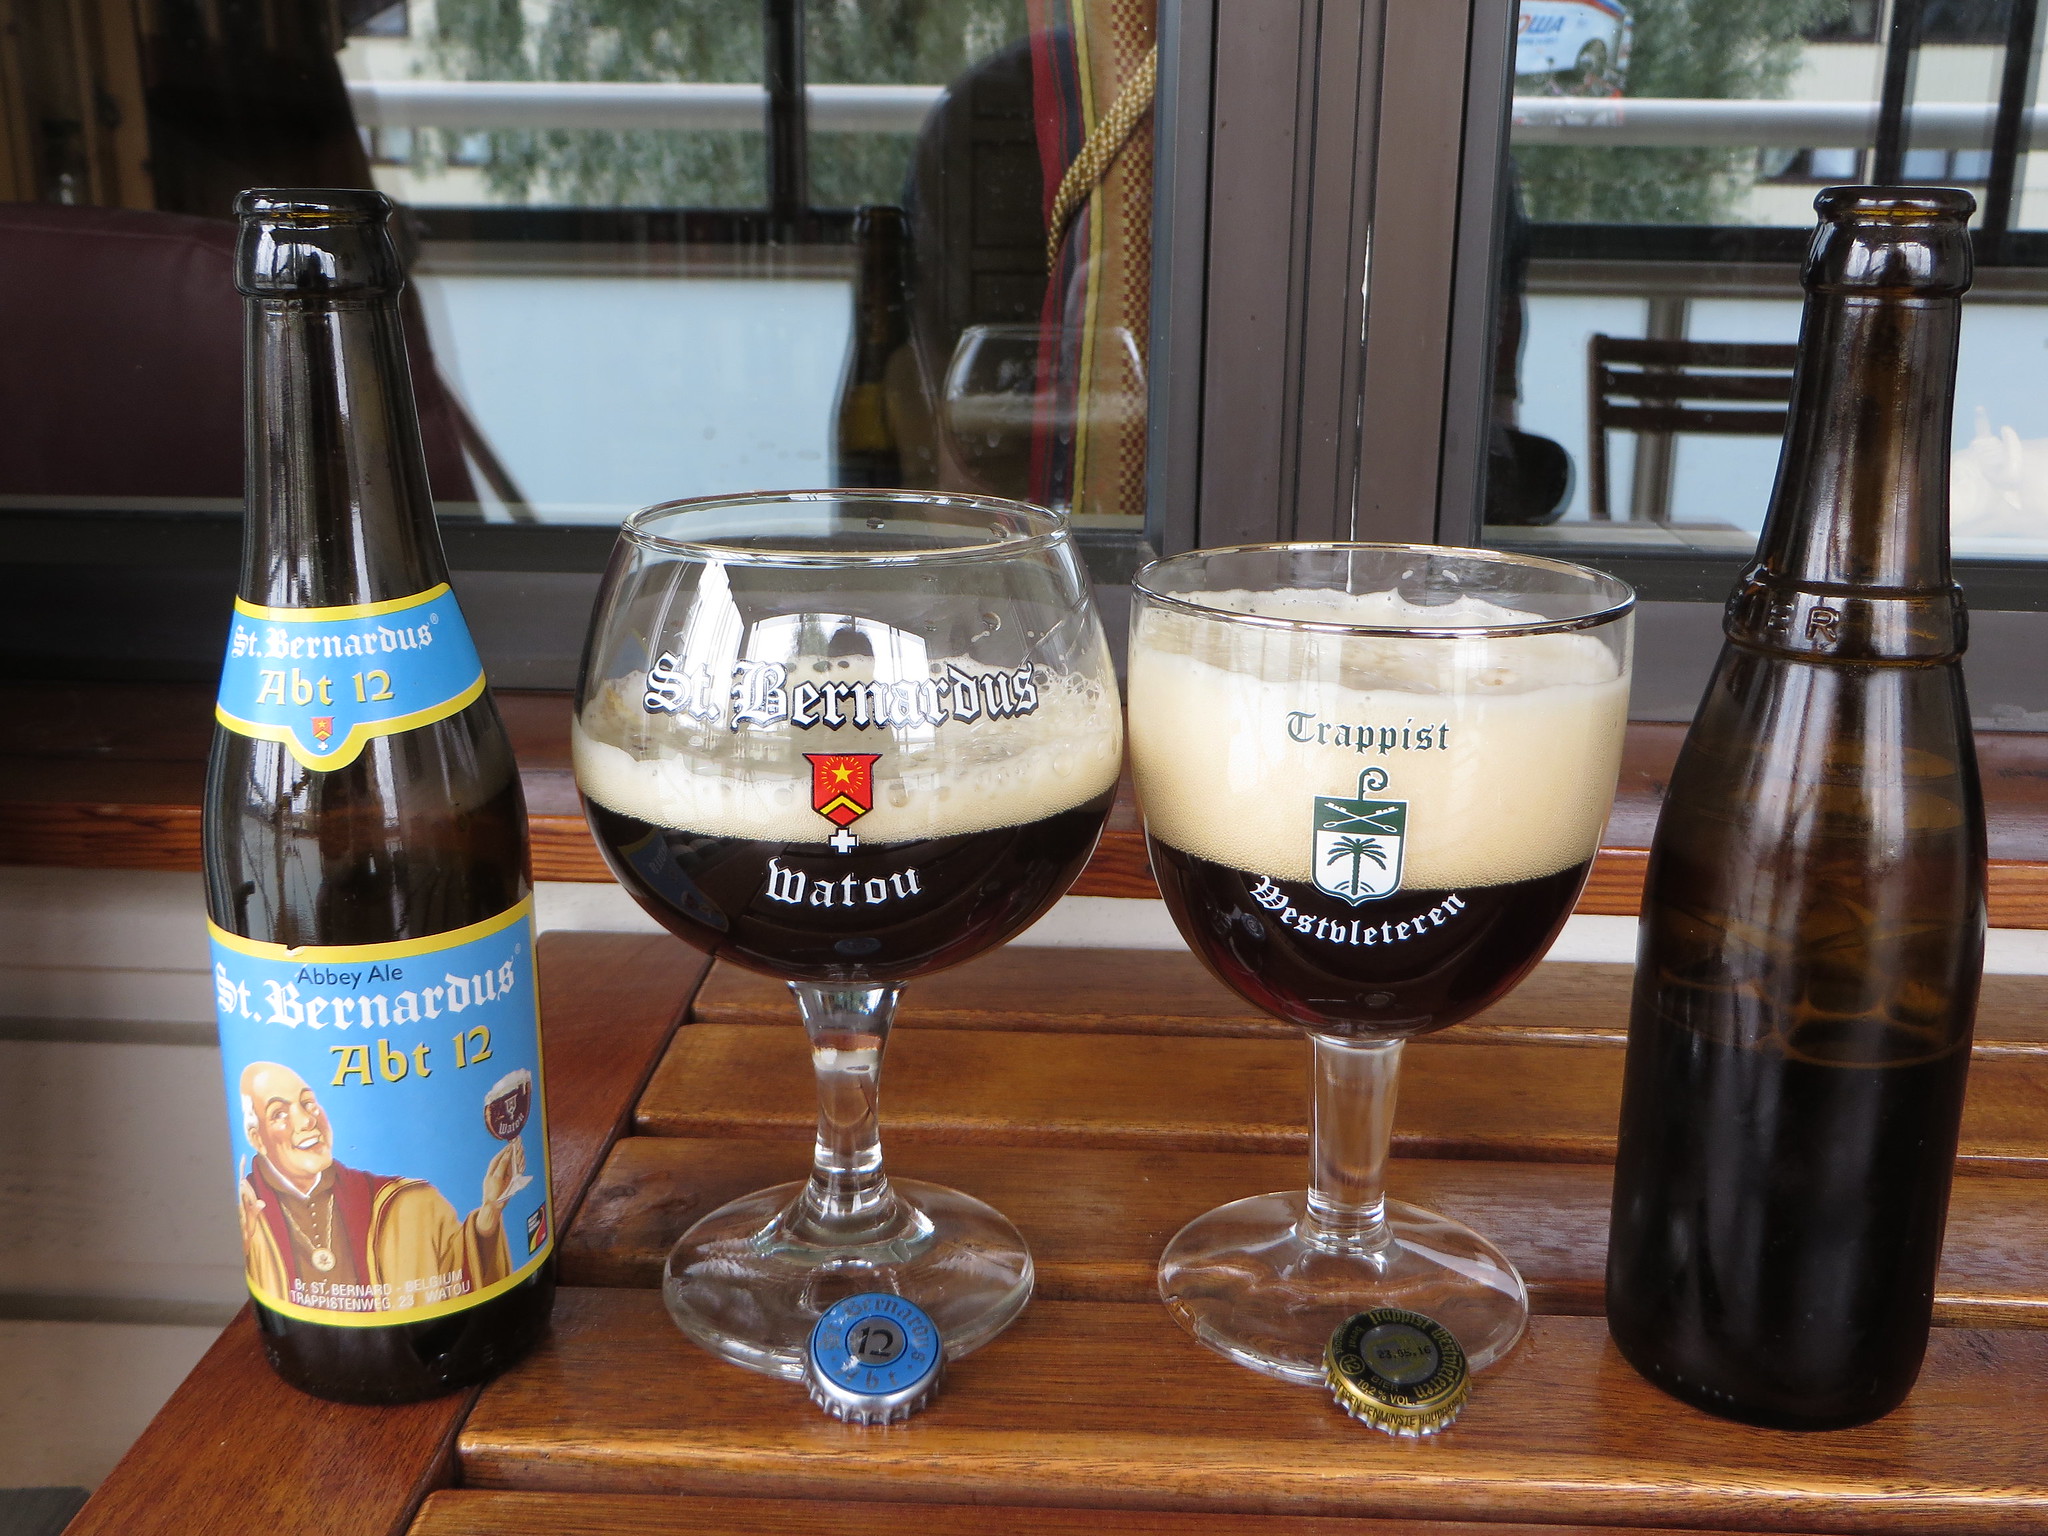 Belgian monks act on profiteering, agree deal to sell beer in NL - DutchNews.nl